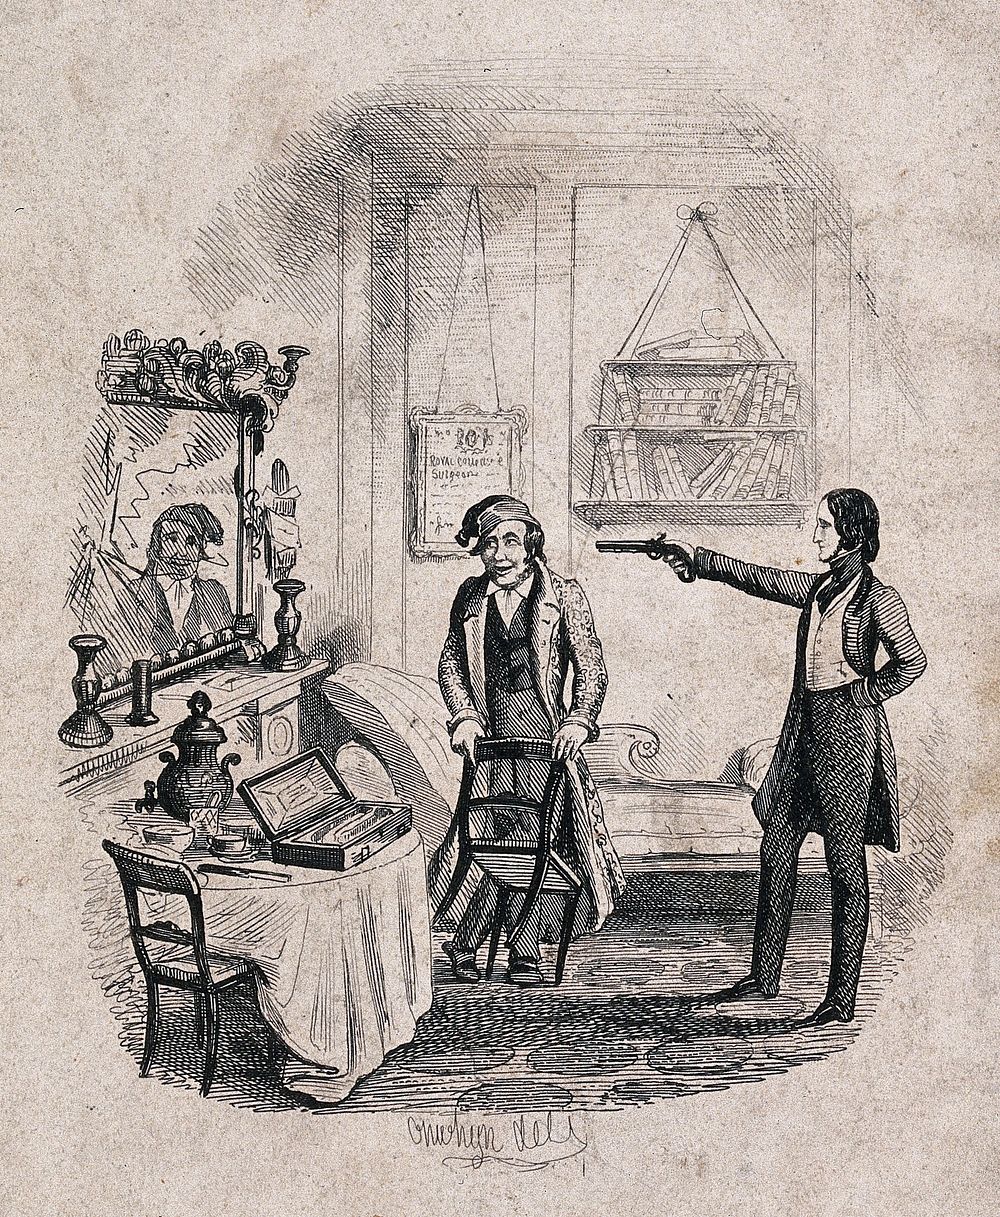 Sylvester Sound aiming a pistol at a broken mirror. Etching by T. Onwhyn, 1844.